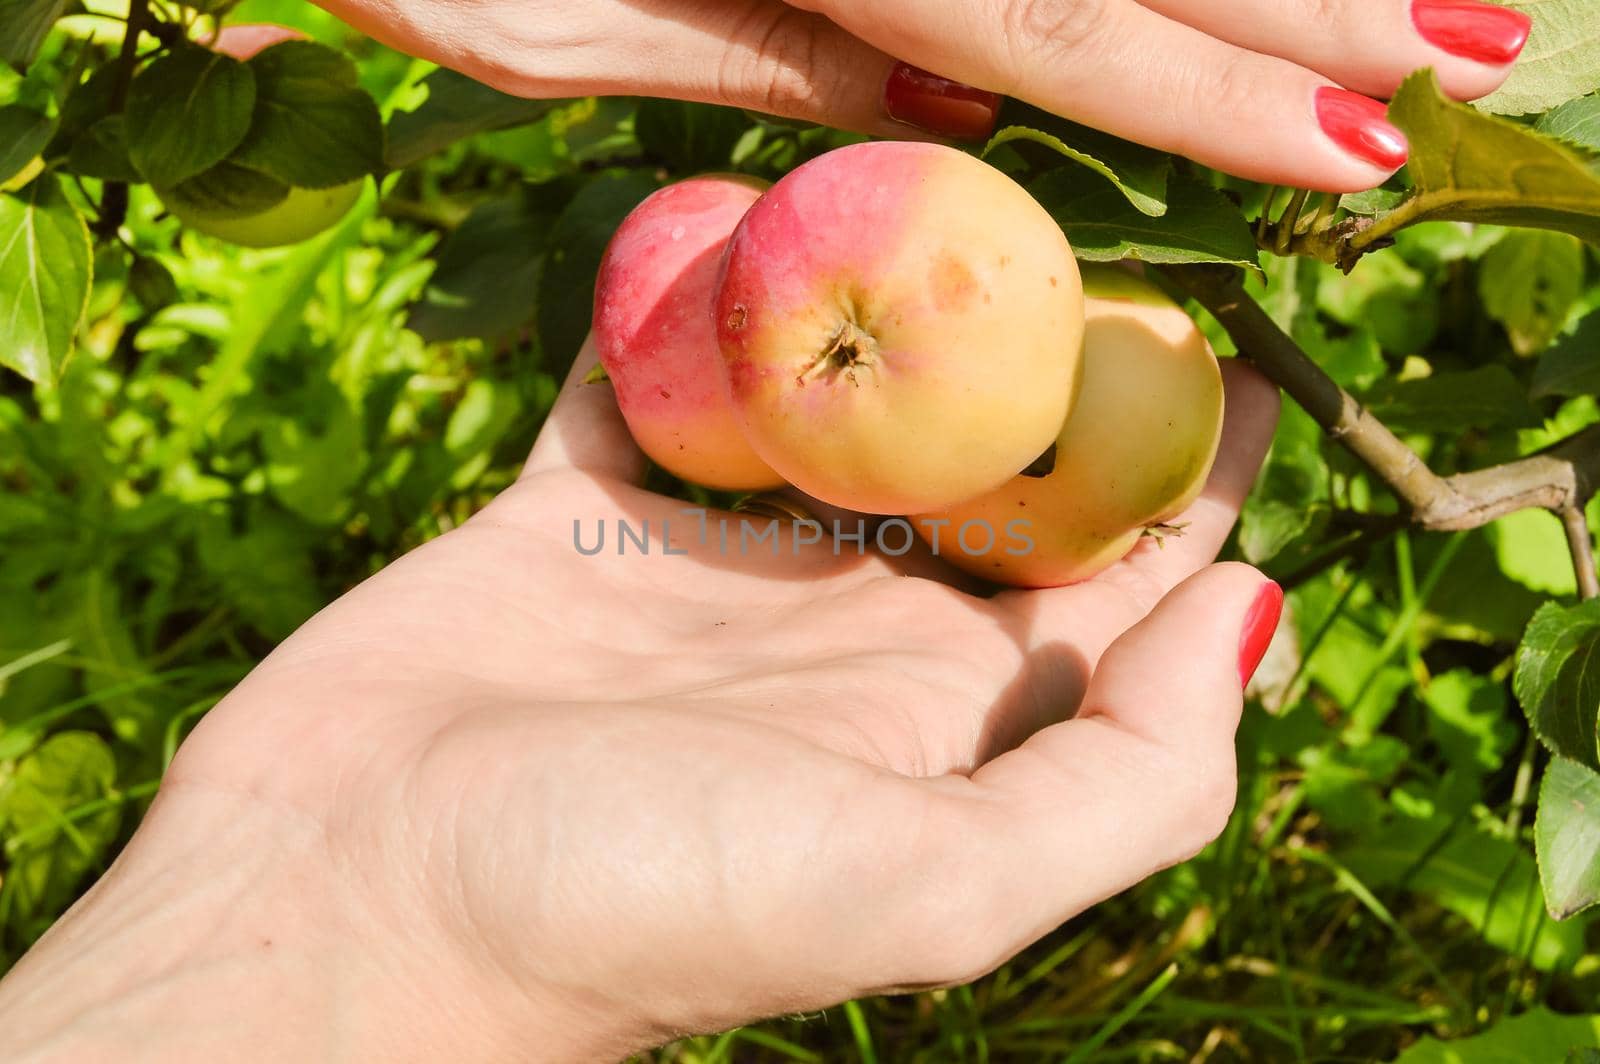 Beautiful women's hands with red manicure pluck ripe apples from a branch on a sunny summer day, harvesting organic fruits.